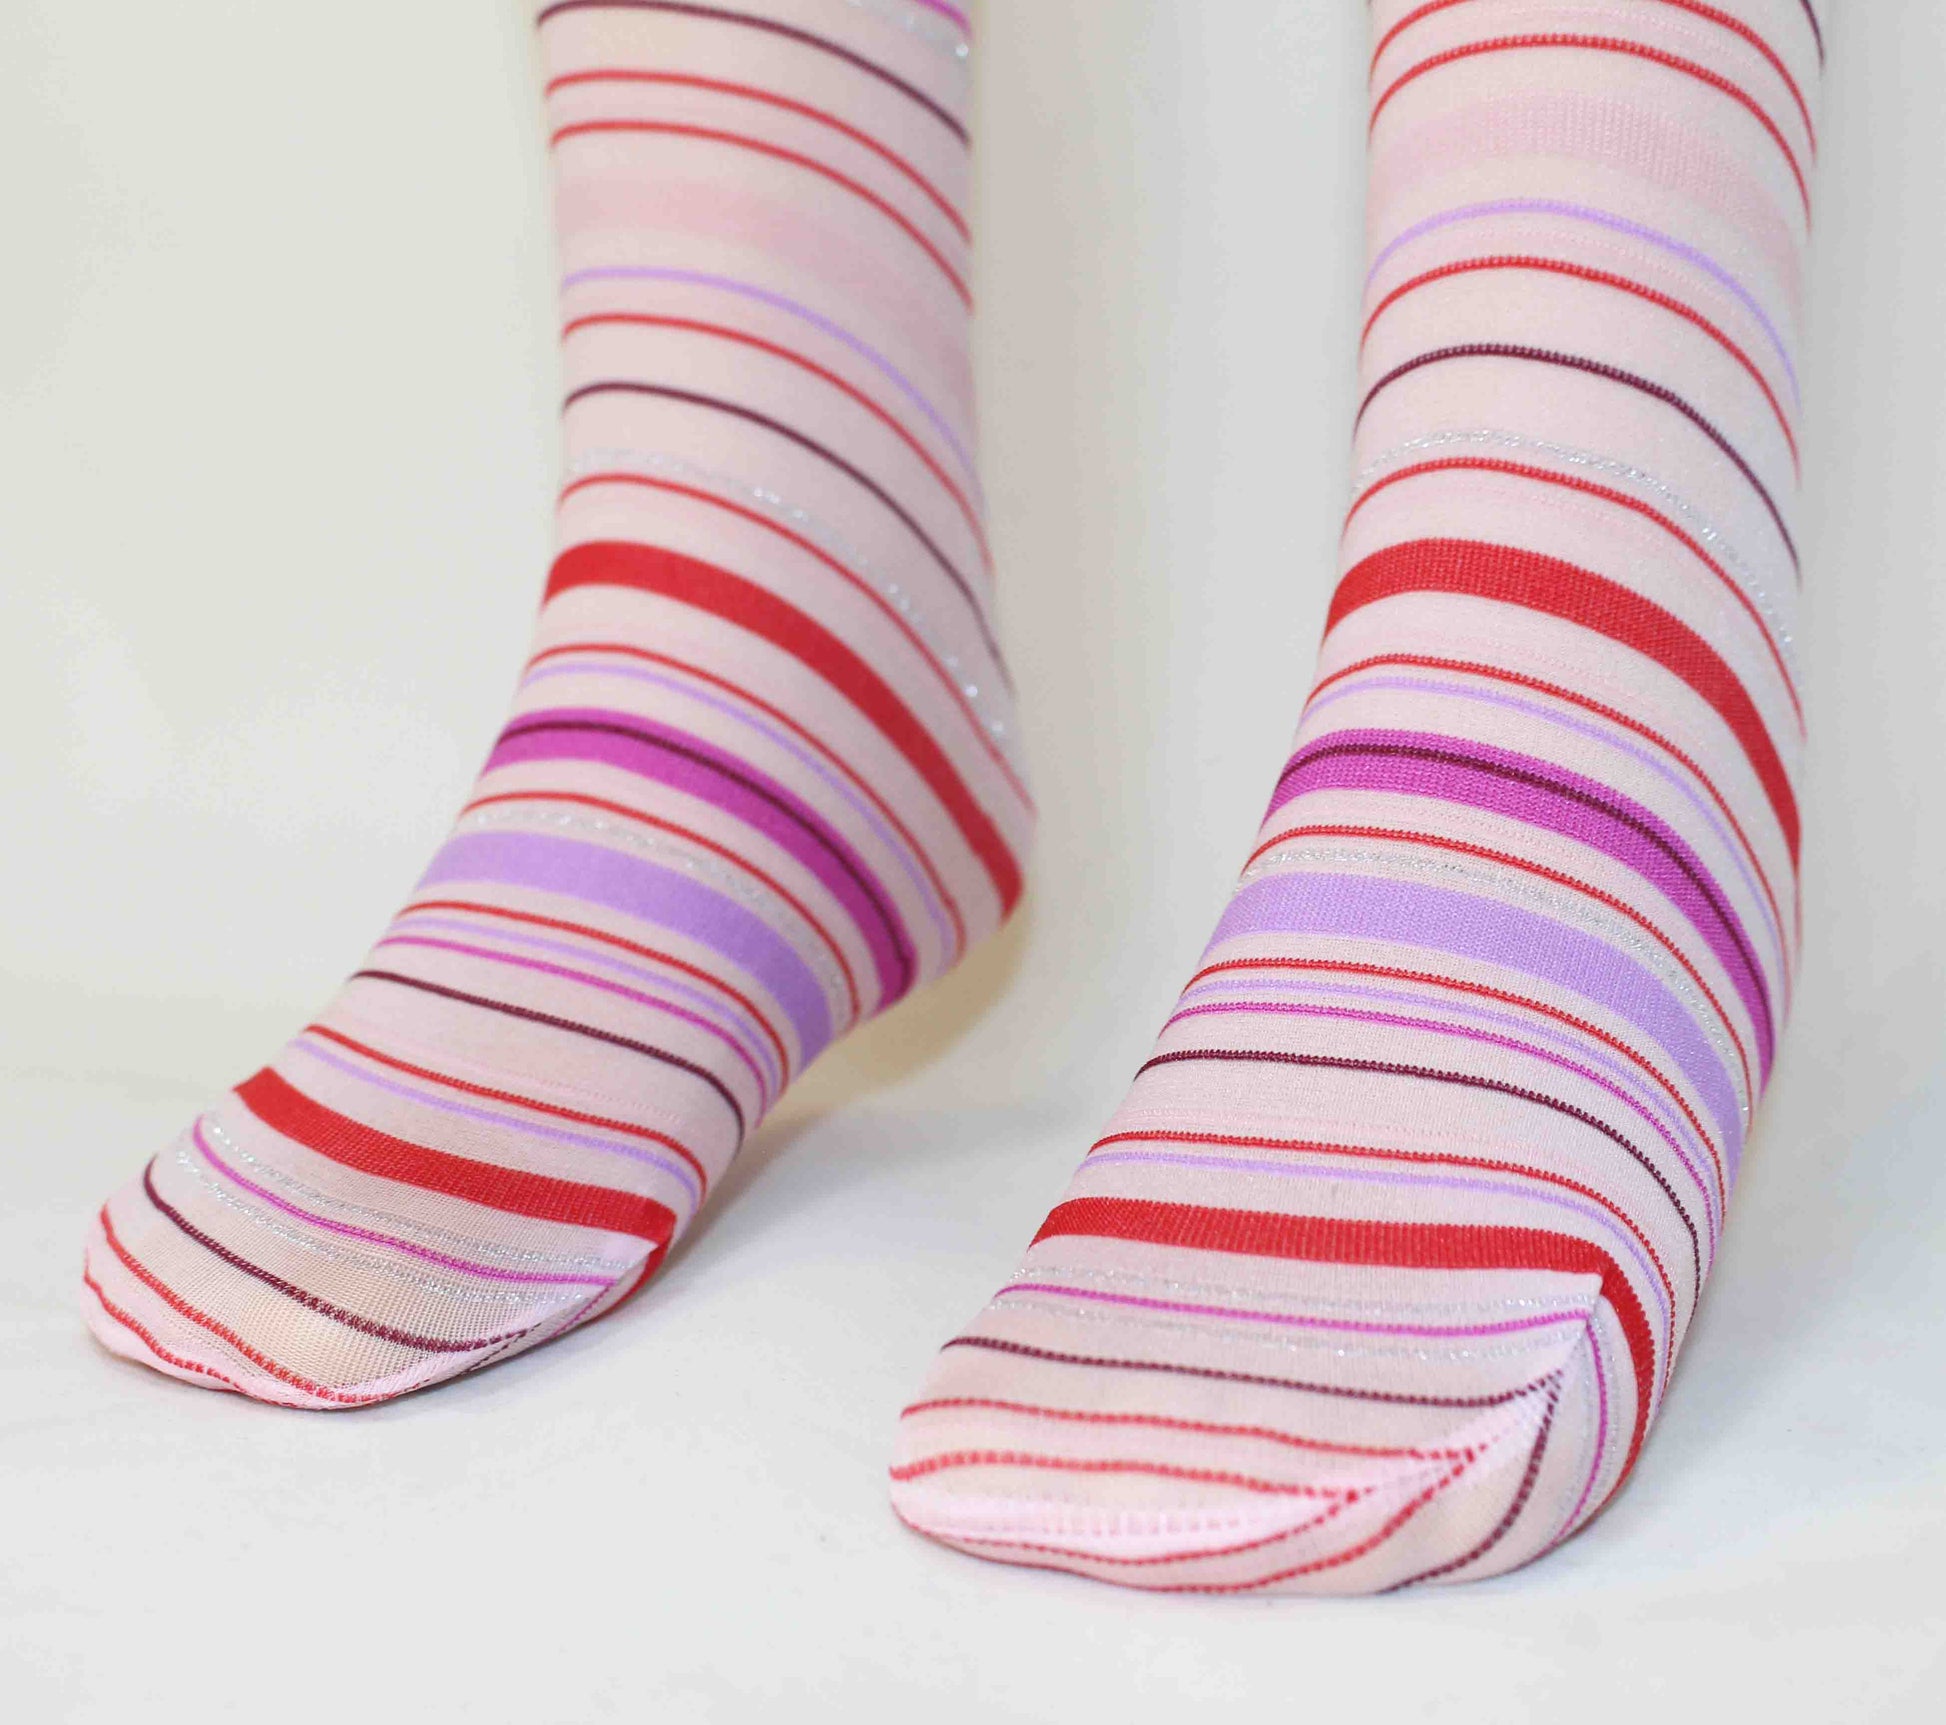 Omsa Crayons Kid's Tights detail - Light pink soft opaque children's fashion tights with a horizontal striped pattern in red, lilac, pink, dark purple and silver.